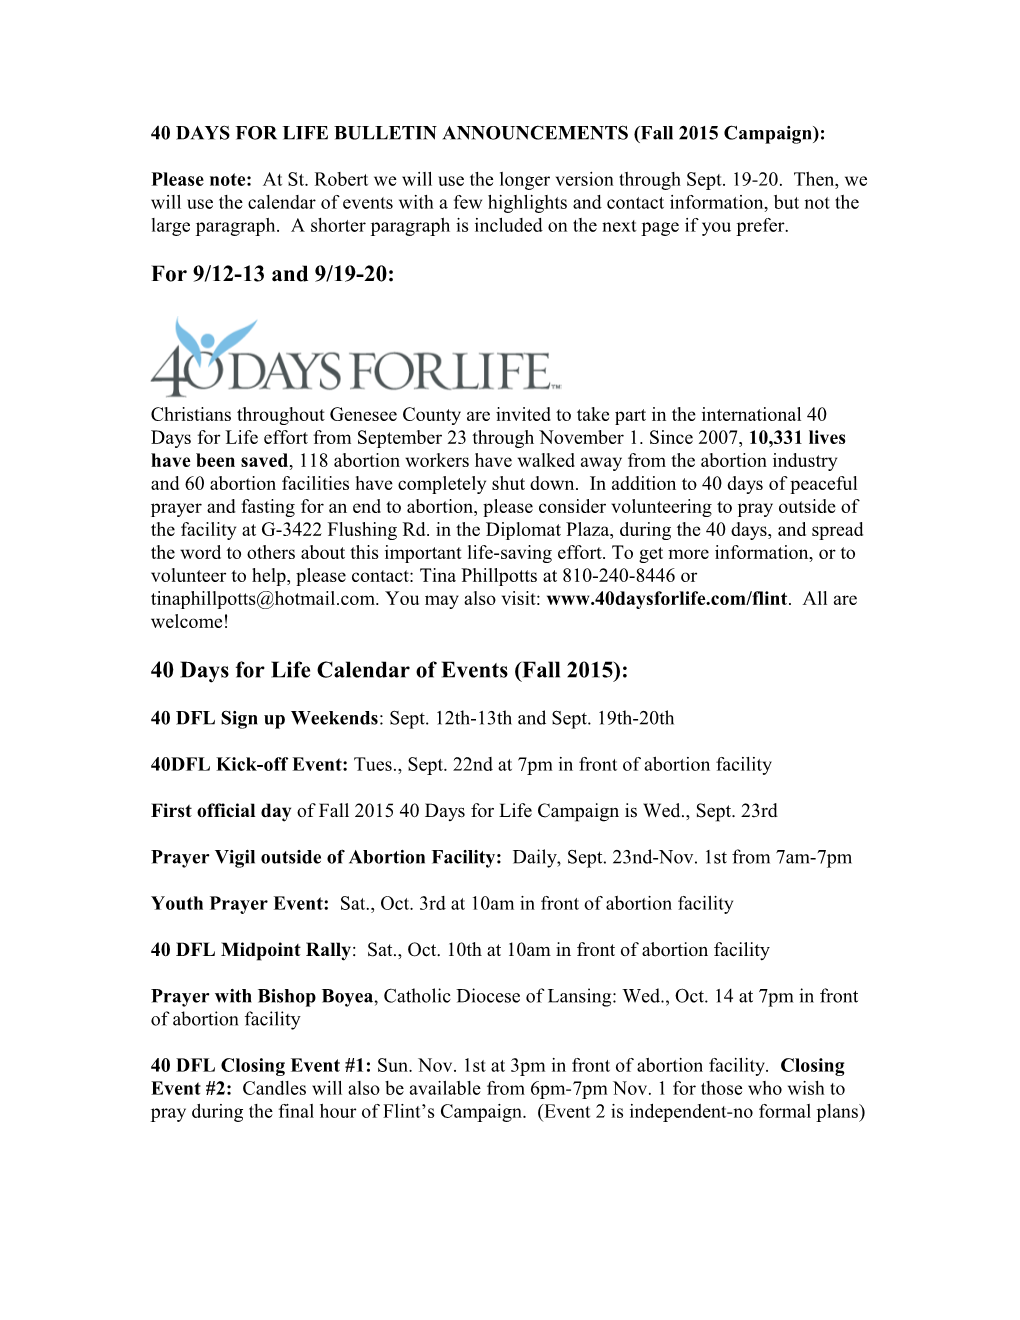 40 DAYS for LIFE BULLETIN ANNOUNCEMENTS (Fall 2015 Campaign)